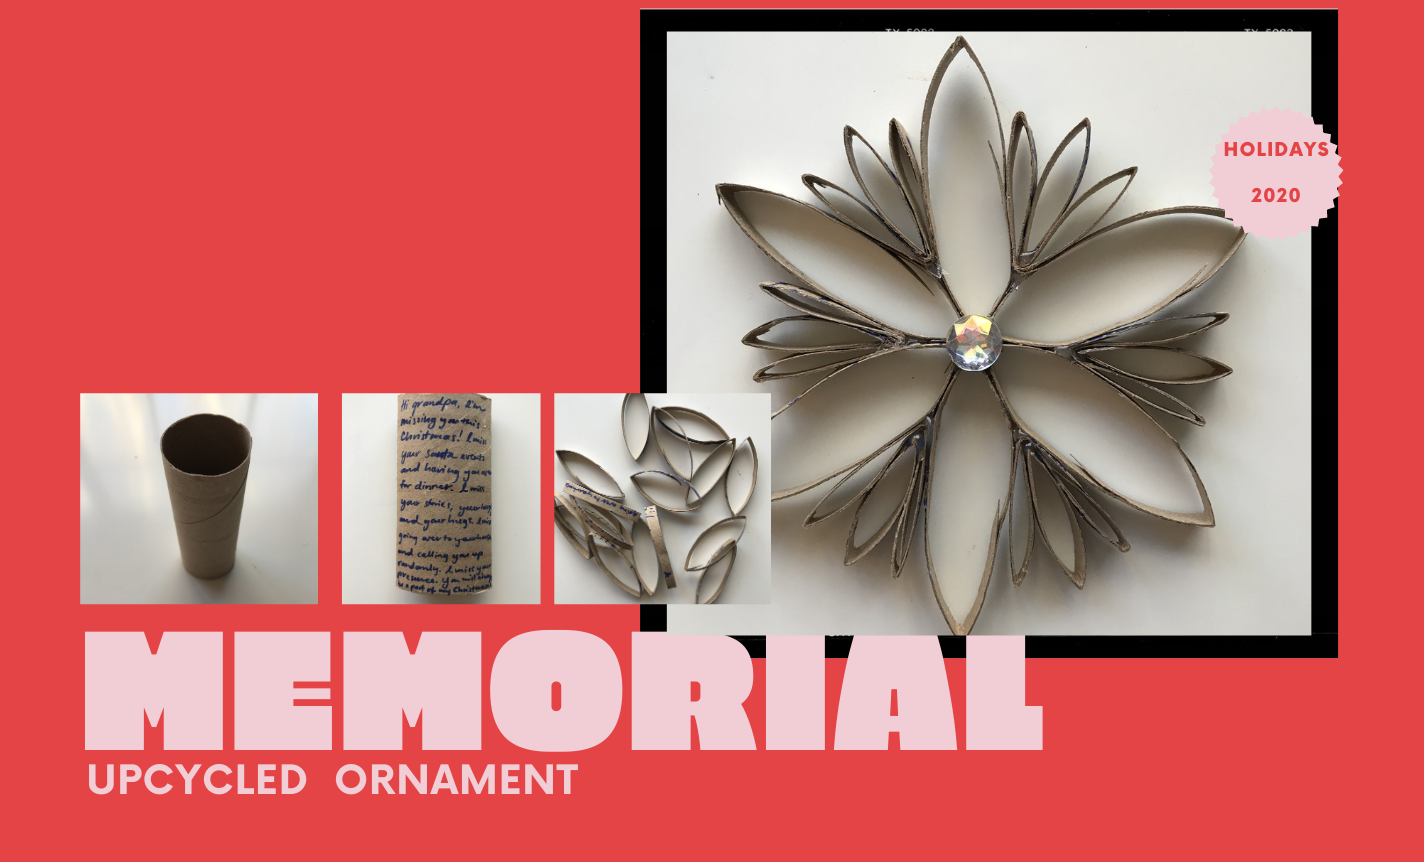 Upcycled Memorial Ornaments